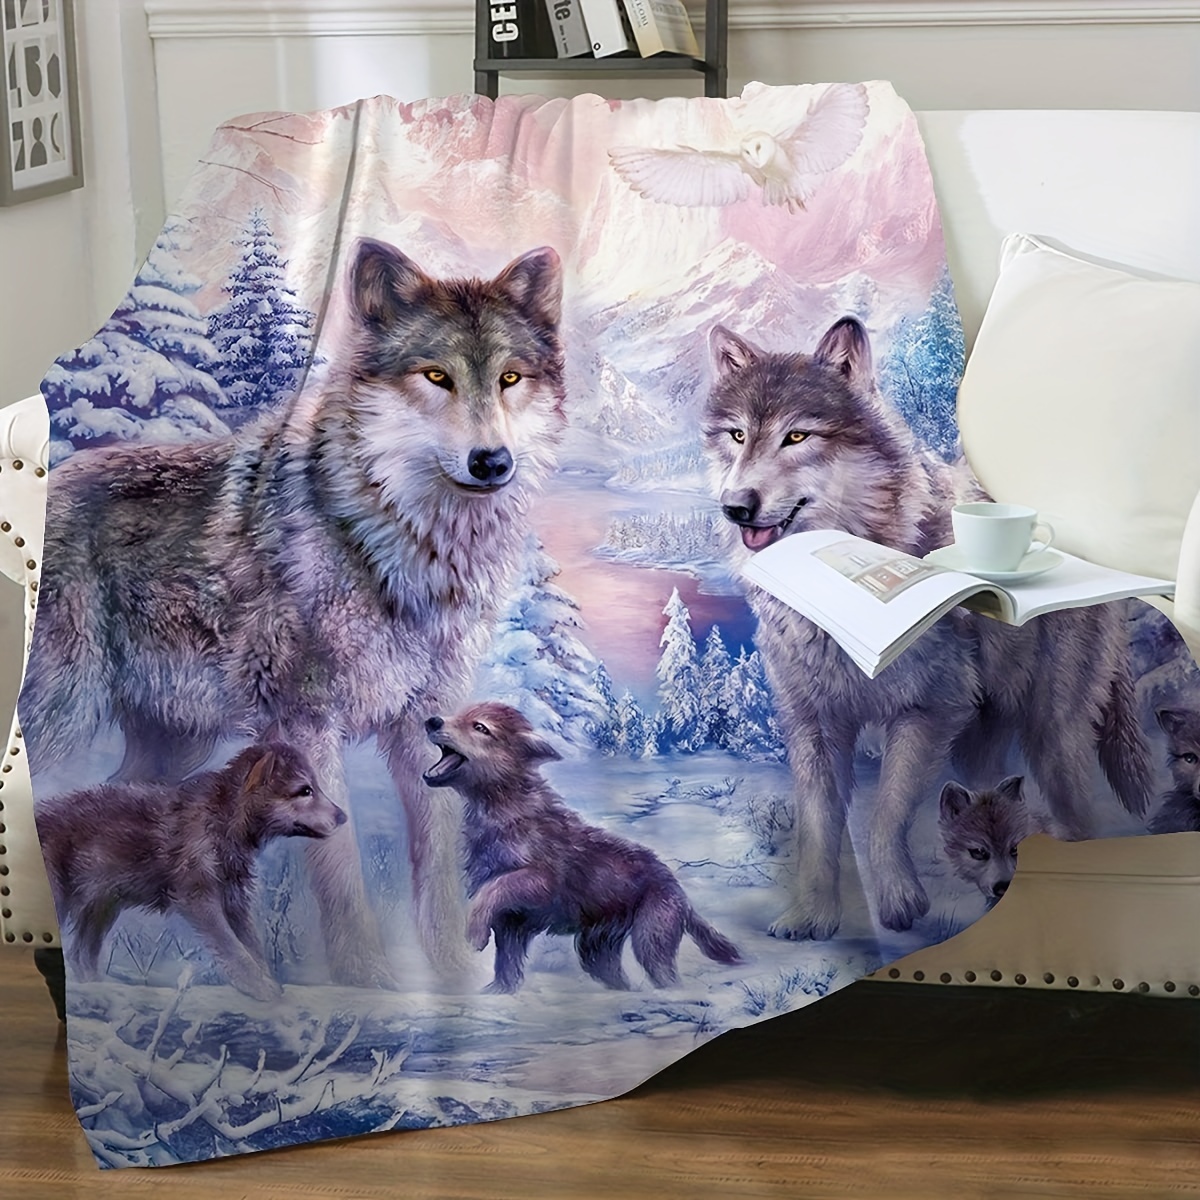 

Animal Snow Wolf Pattern Printed Blanket Sofa Bed And Travel Super Comfortable Blanket Lunch Rest Blanket Bed Blanket 4 Seasons Twin Bed Blanket Small Cover Blanket Gift